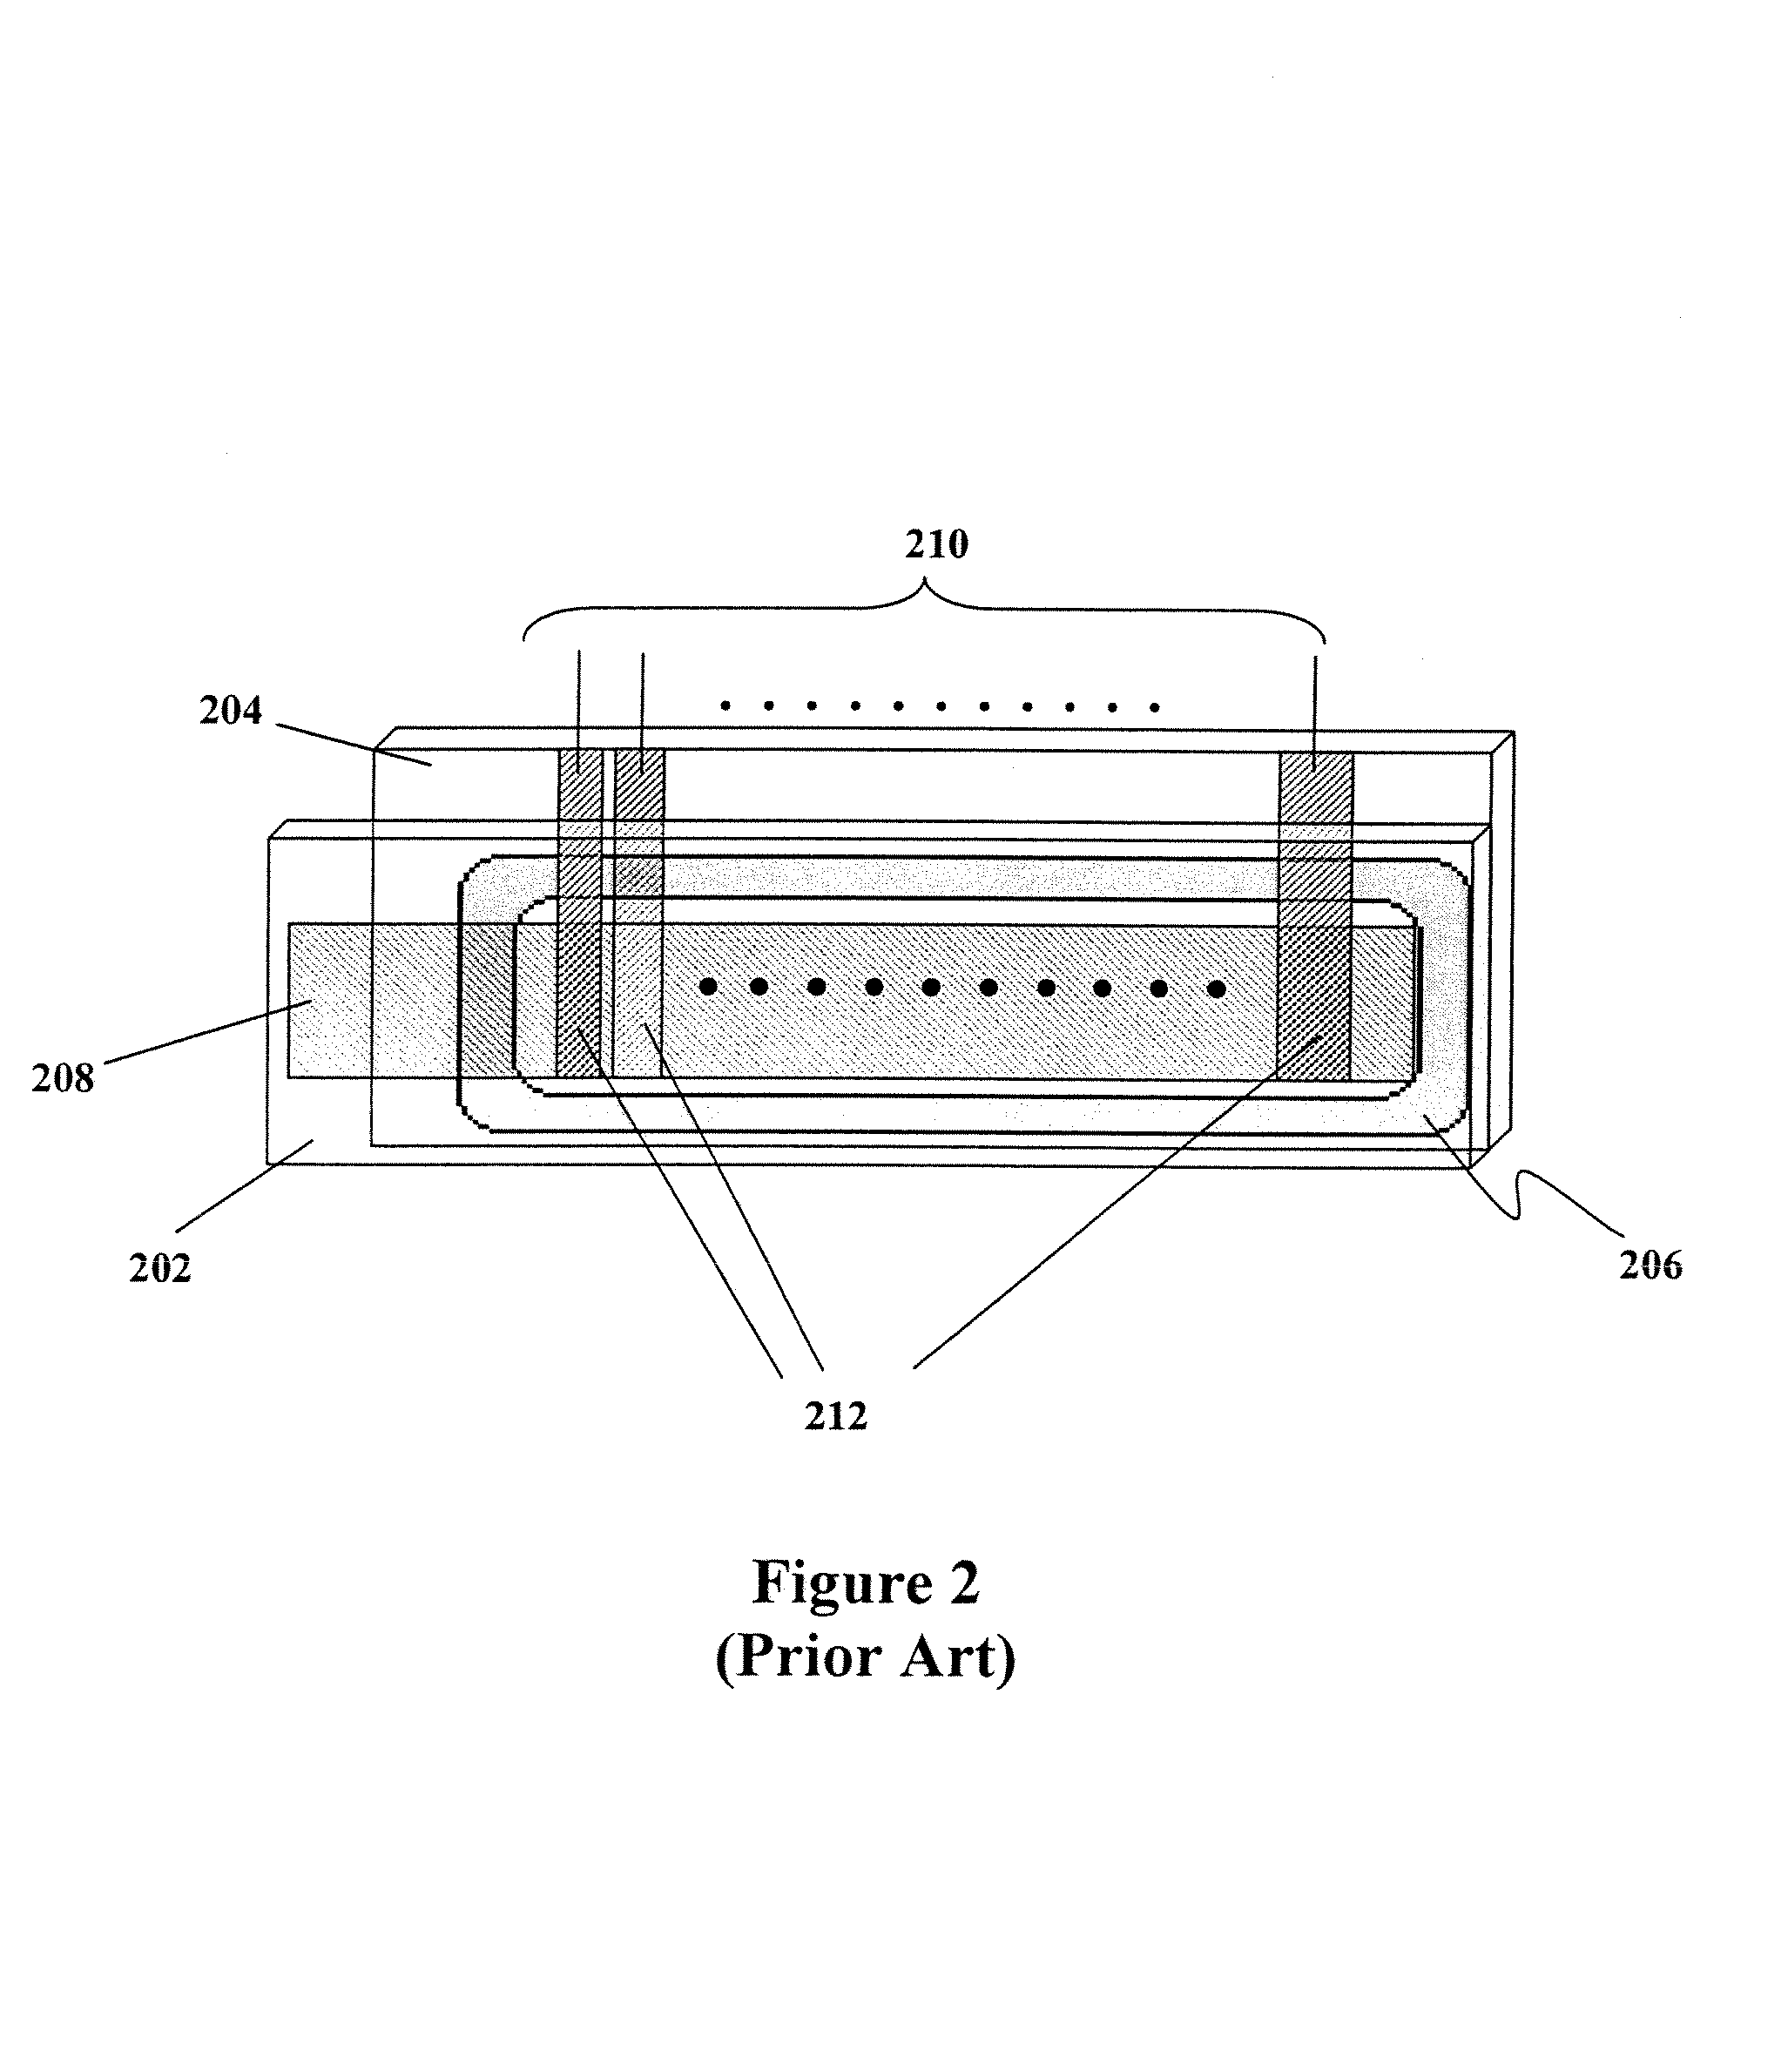 Apparatus and method for optical switching with liquid crystals and birefringent wedges